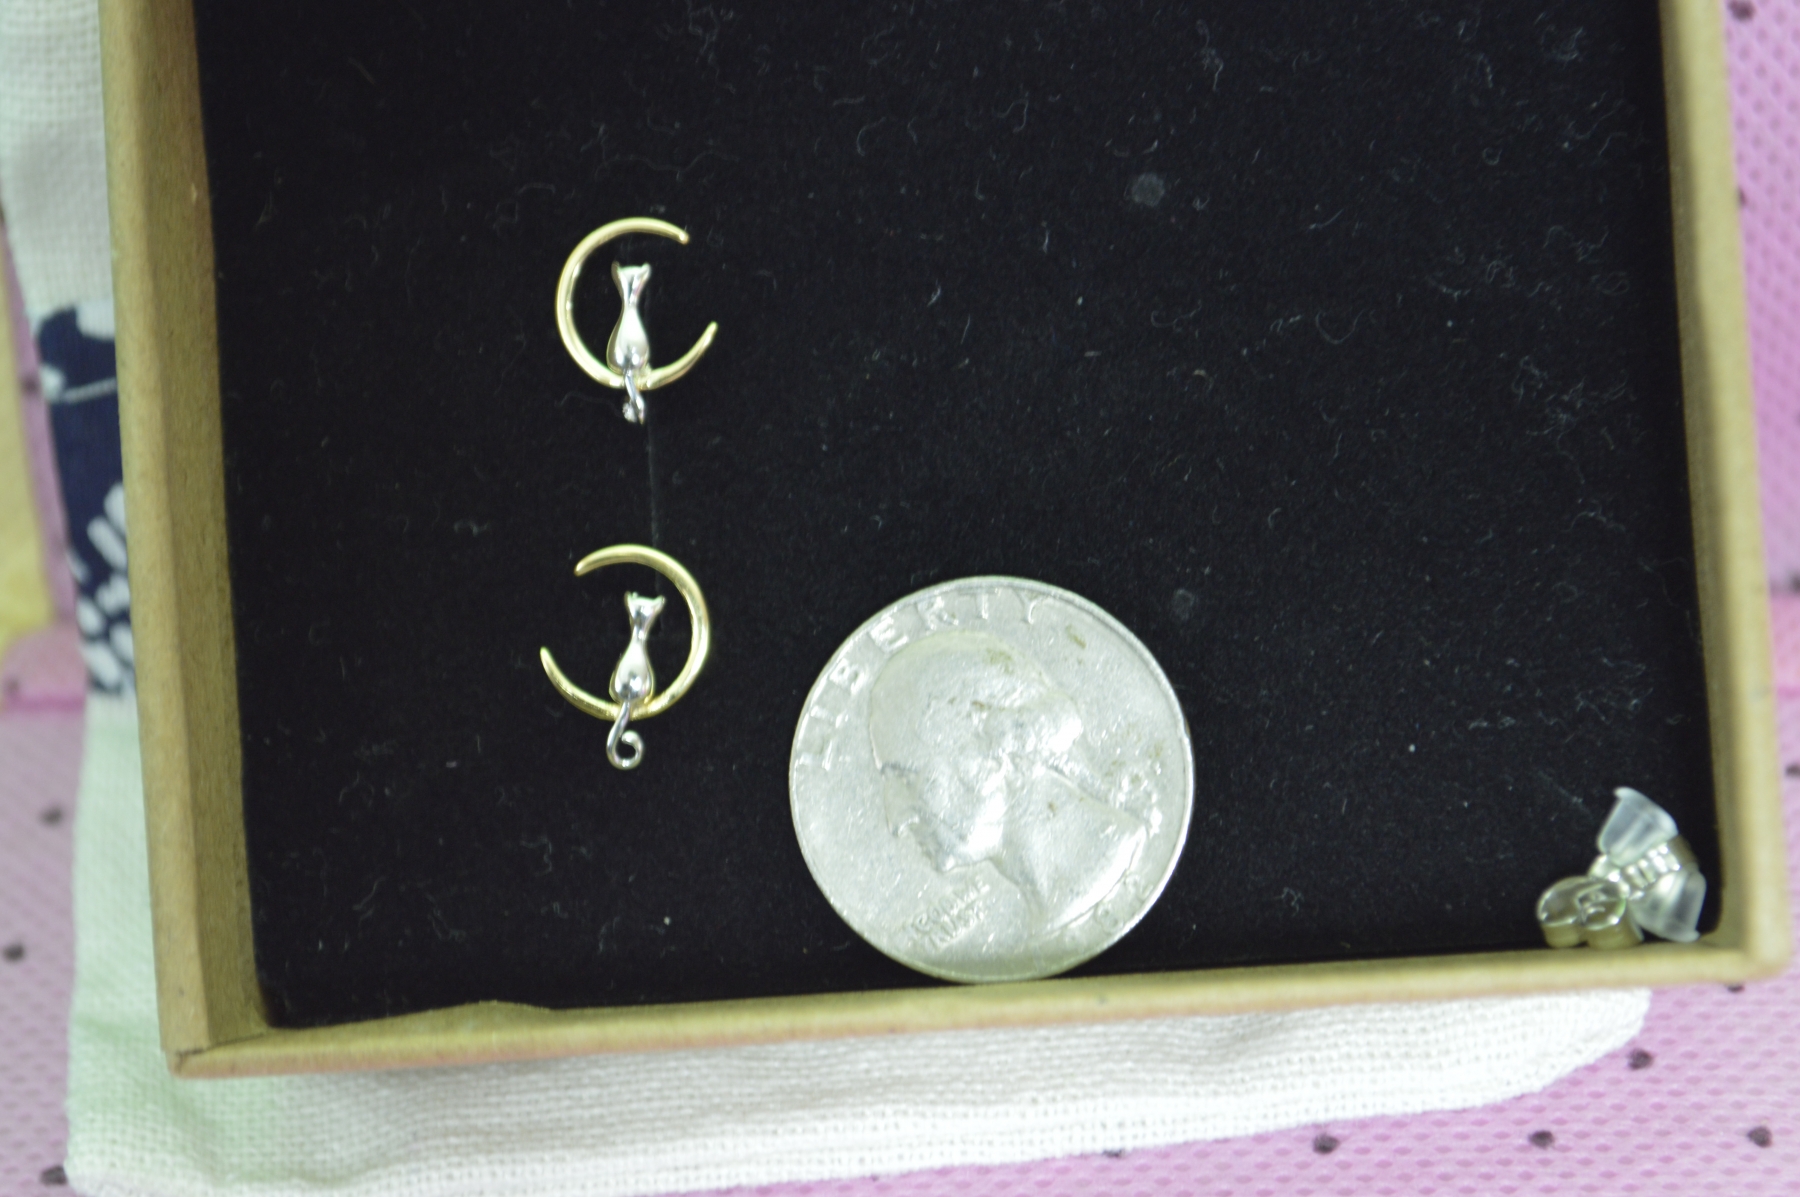 Calling all Moonie Fans.  The cutest and dainty little moon kitty earrings ever.